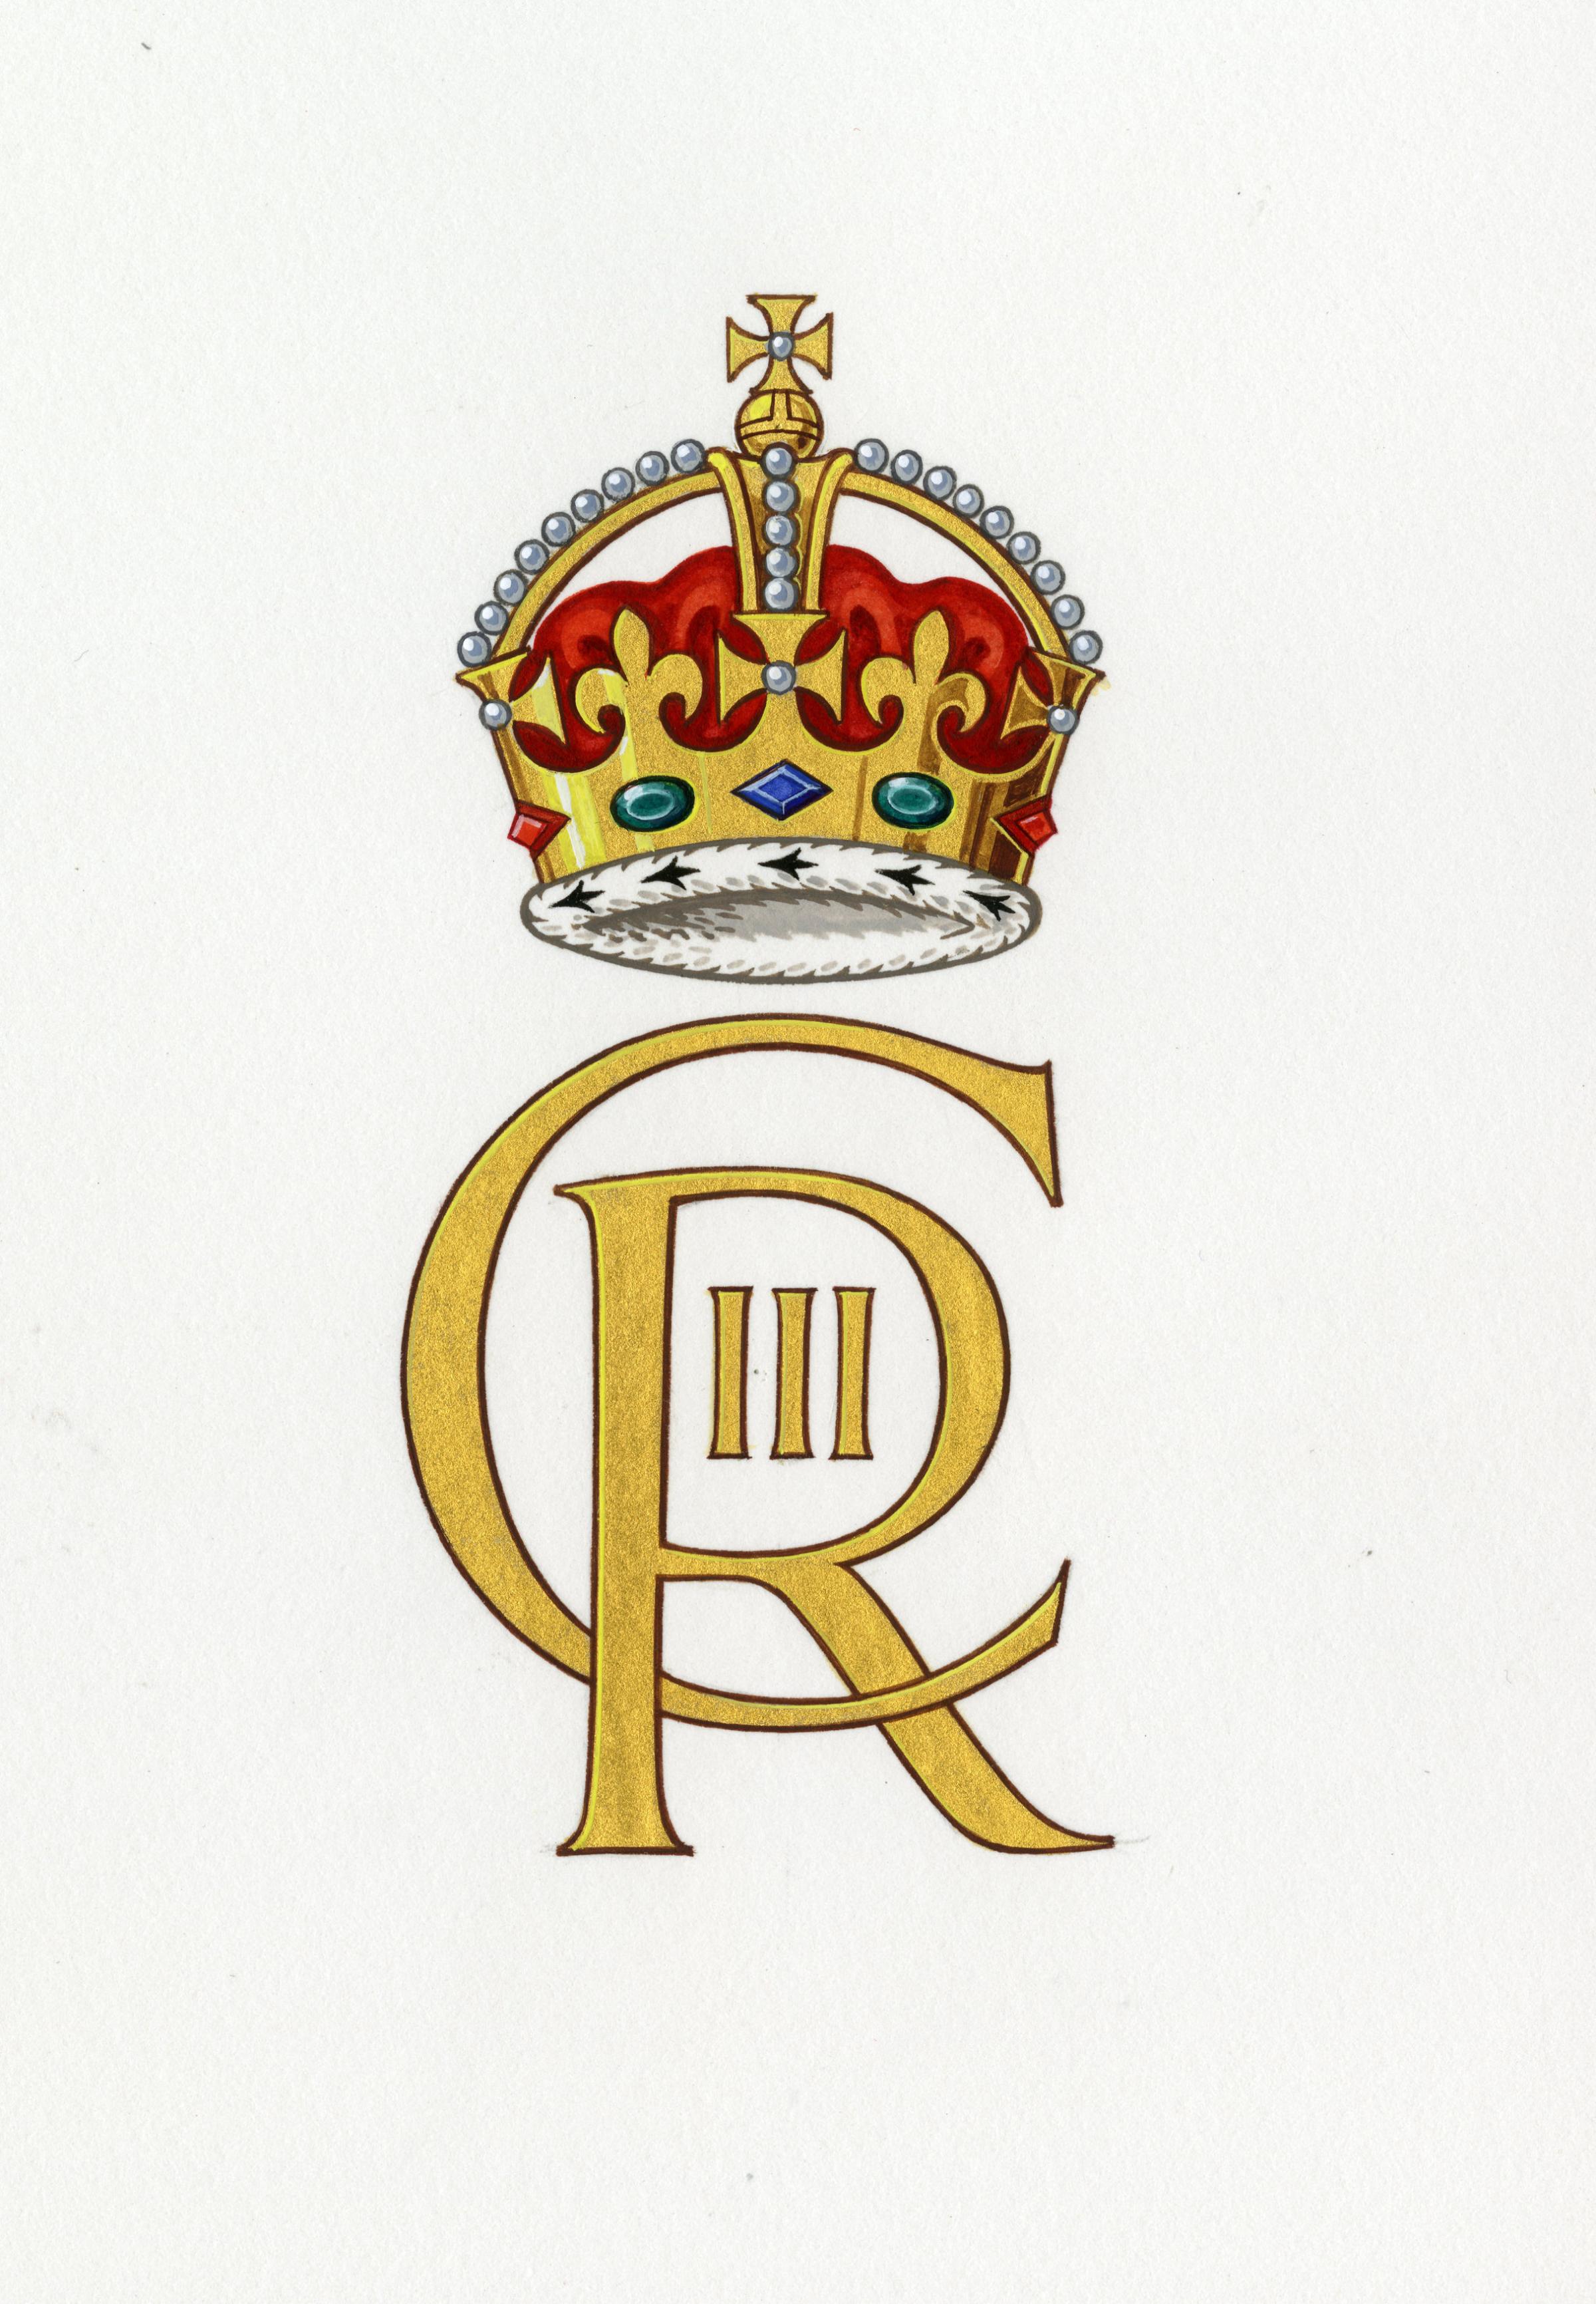 The cypher is the Sovereigns monogram, consisting of the initials of the monarchs name, Charles, and title, Rex - Latin for King, alongside a representation of the Crown. 